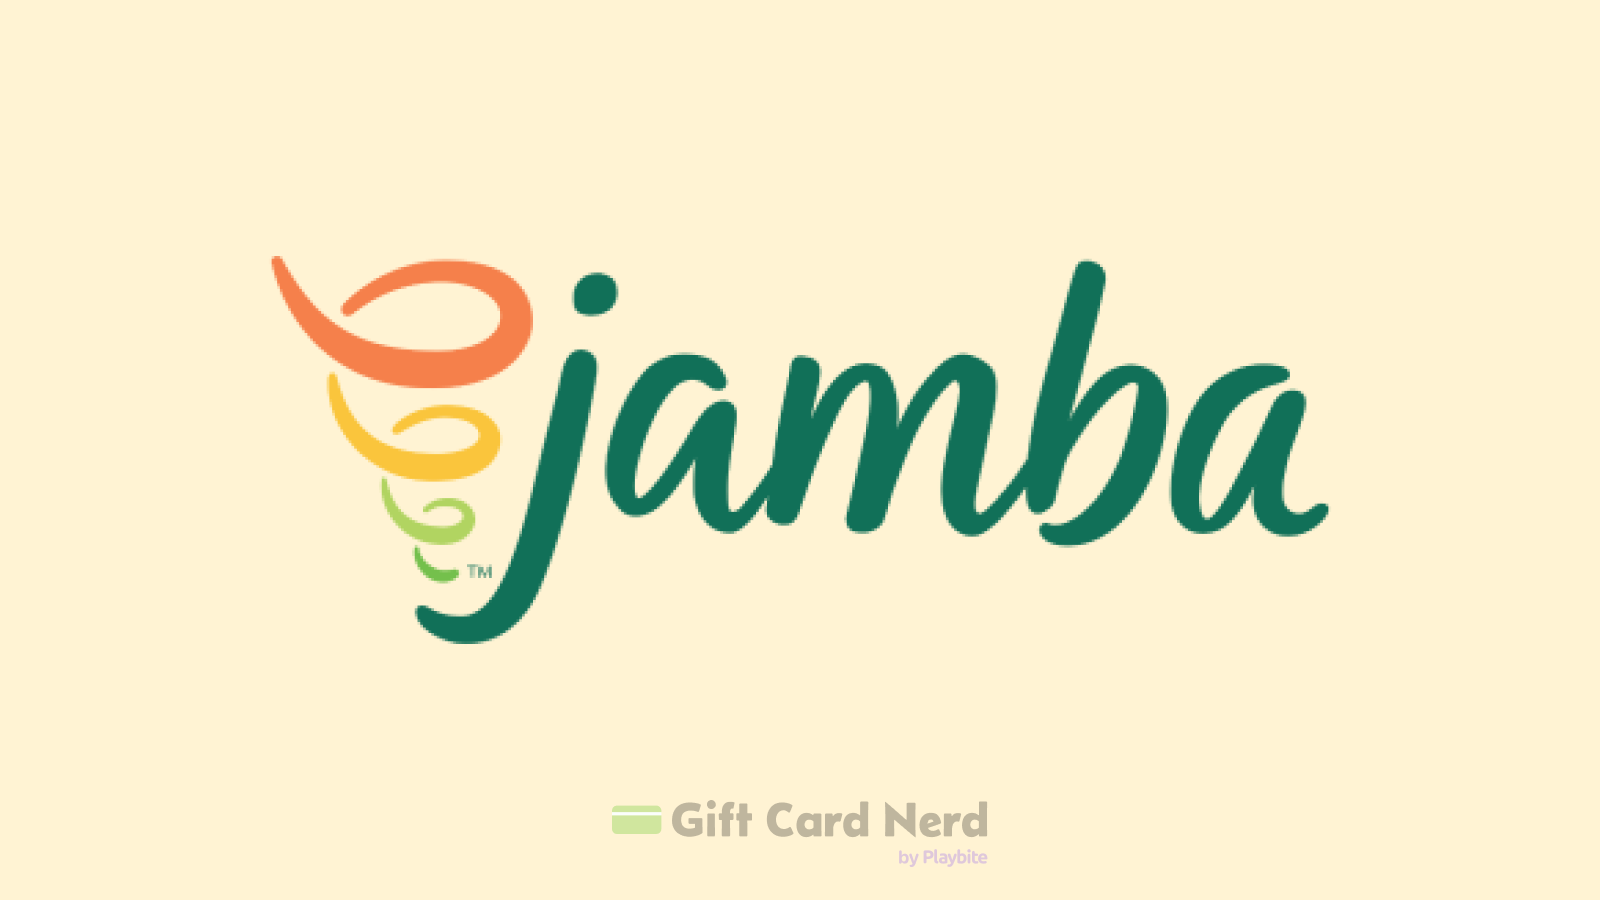 Can I use a Jamba Juice gift card on Google Play Store?